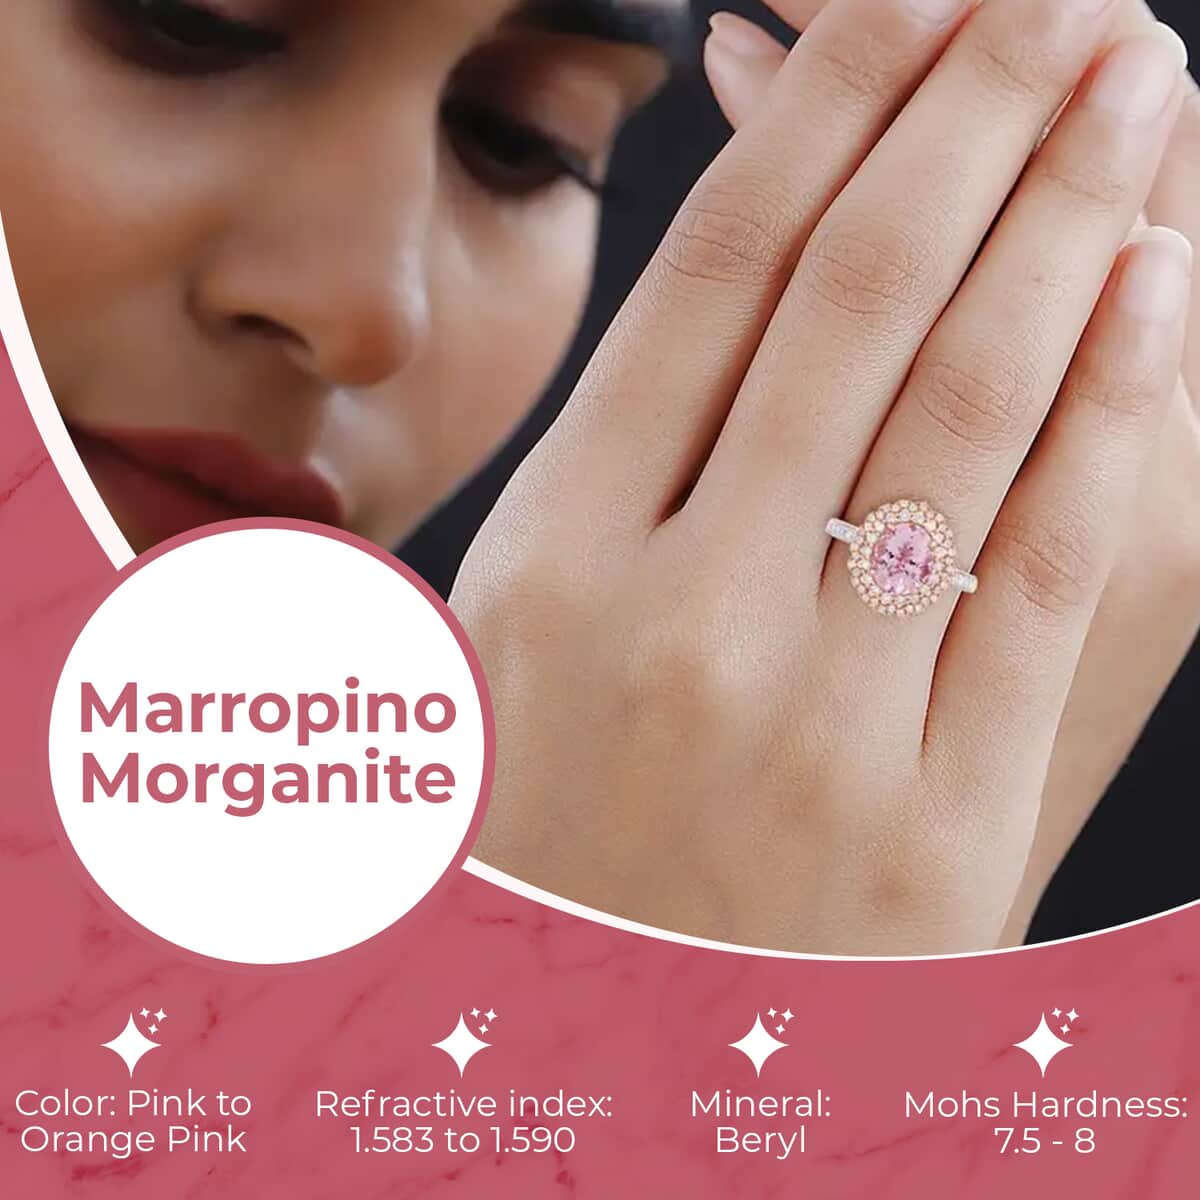 Ankur Treasure Chest Modani Marropino Morganite Ring, 14K Rose Gold Ring, Diamond Floral Halo Ring, Natural Pink And White Diamond Accent Ring 1.95 ctw (Size 8.0) image number 2